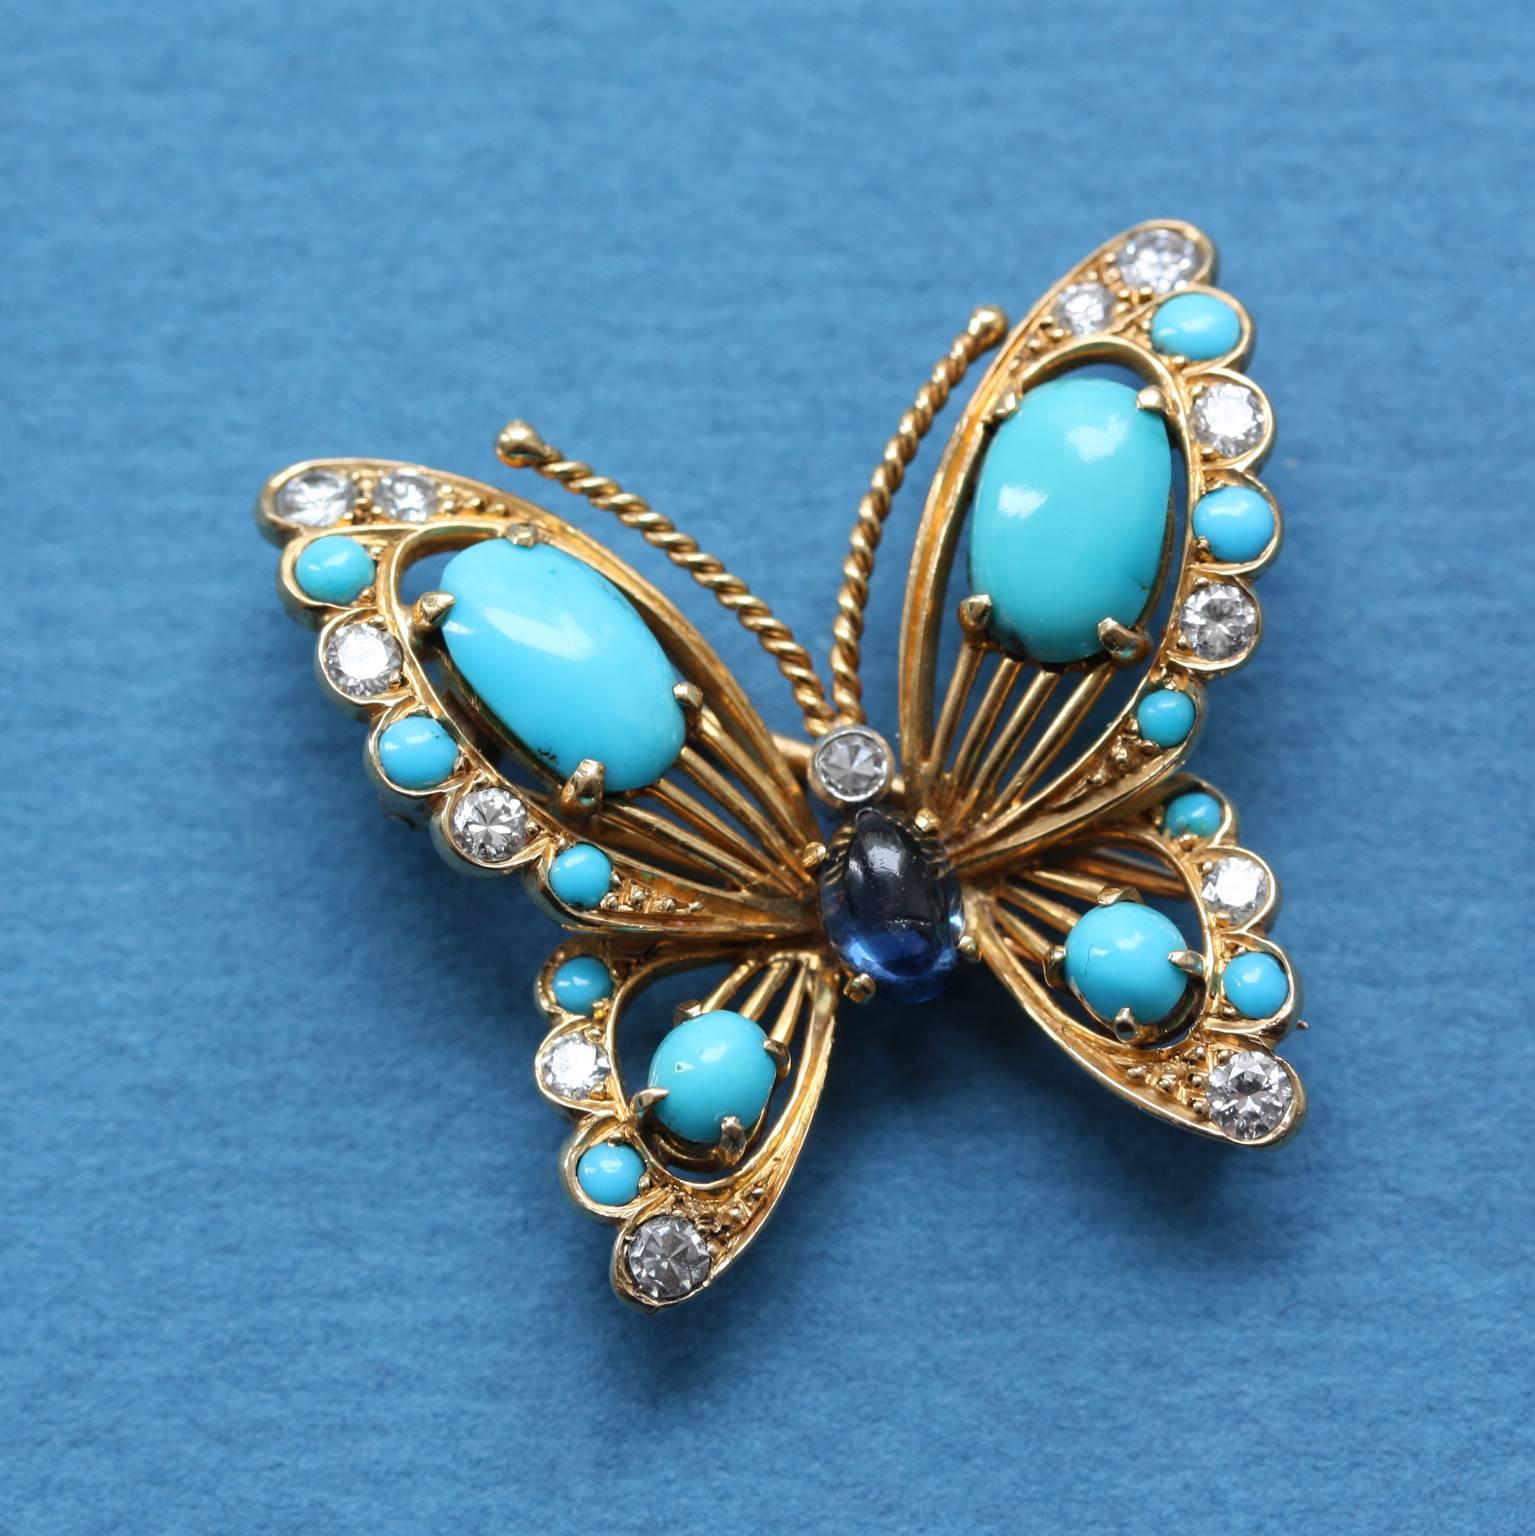 An 18-carat gold butterfly clip brooch set with cabochon-cut turquoises in its wings and a sapphire body. The wings also contain brilliant-cut diamonds, France, signed and numbered: Van Cleef & Arpels, 68335B, 1953.

Weight: 7.5 grams
Dimensions: 3